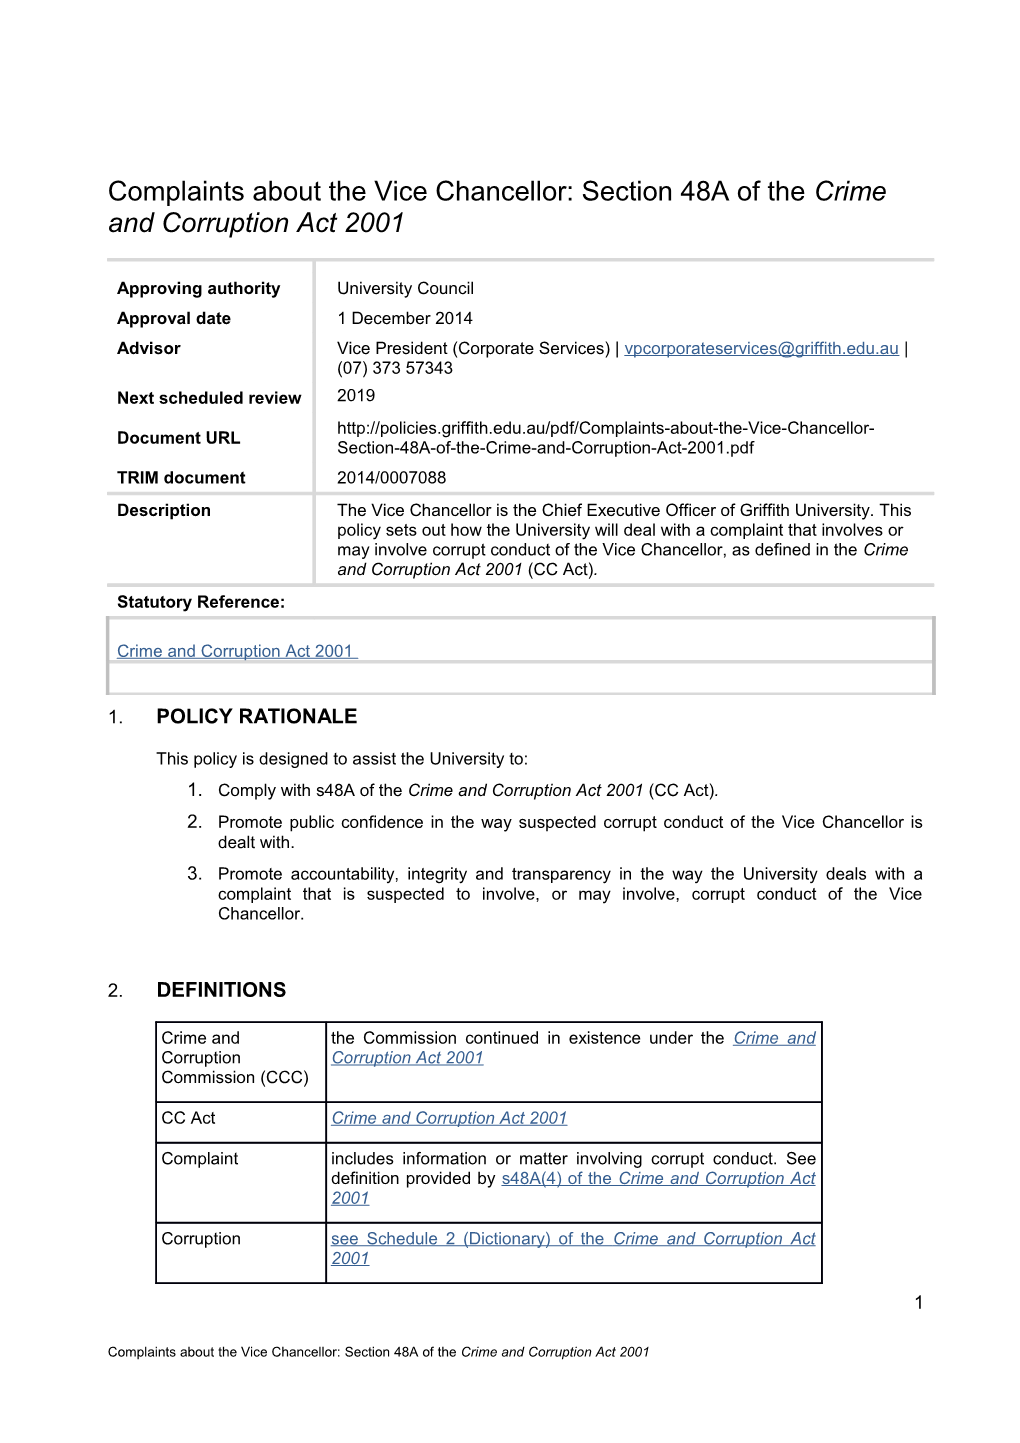 Complaints About the Vice Chancellor Section 48A of the Crime and Corruption Act 2001